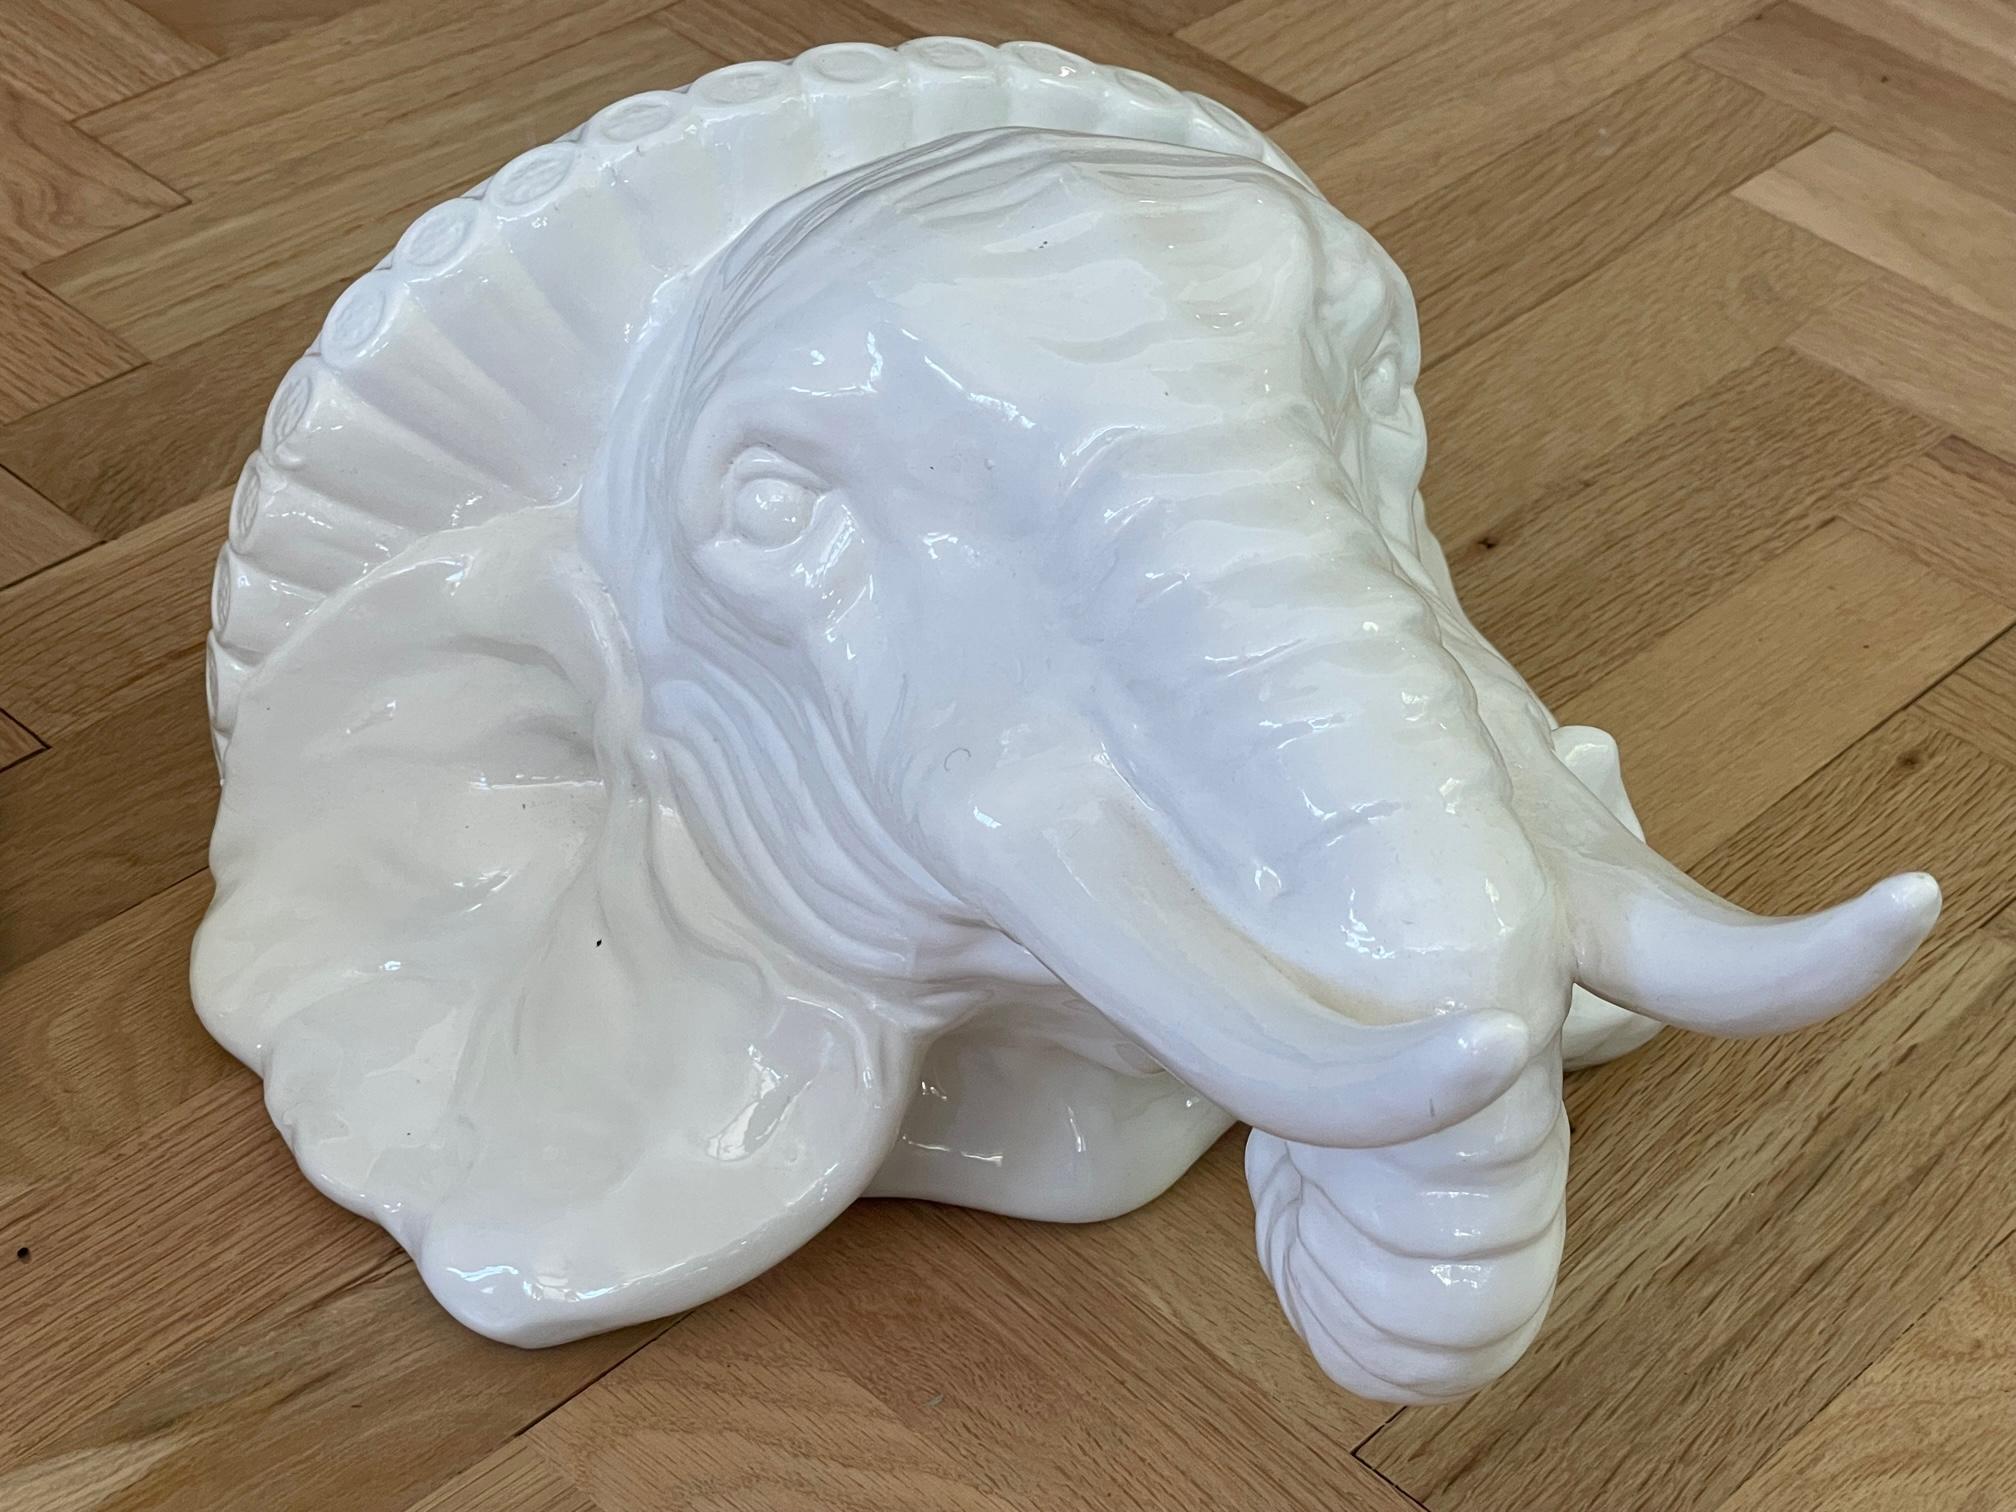 Mid 20th Century Italian Porcelain Elephant Head Wall Shelves In Good Condition For Sale In Jacksonville, FL